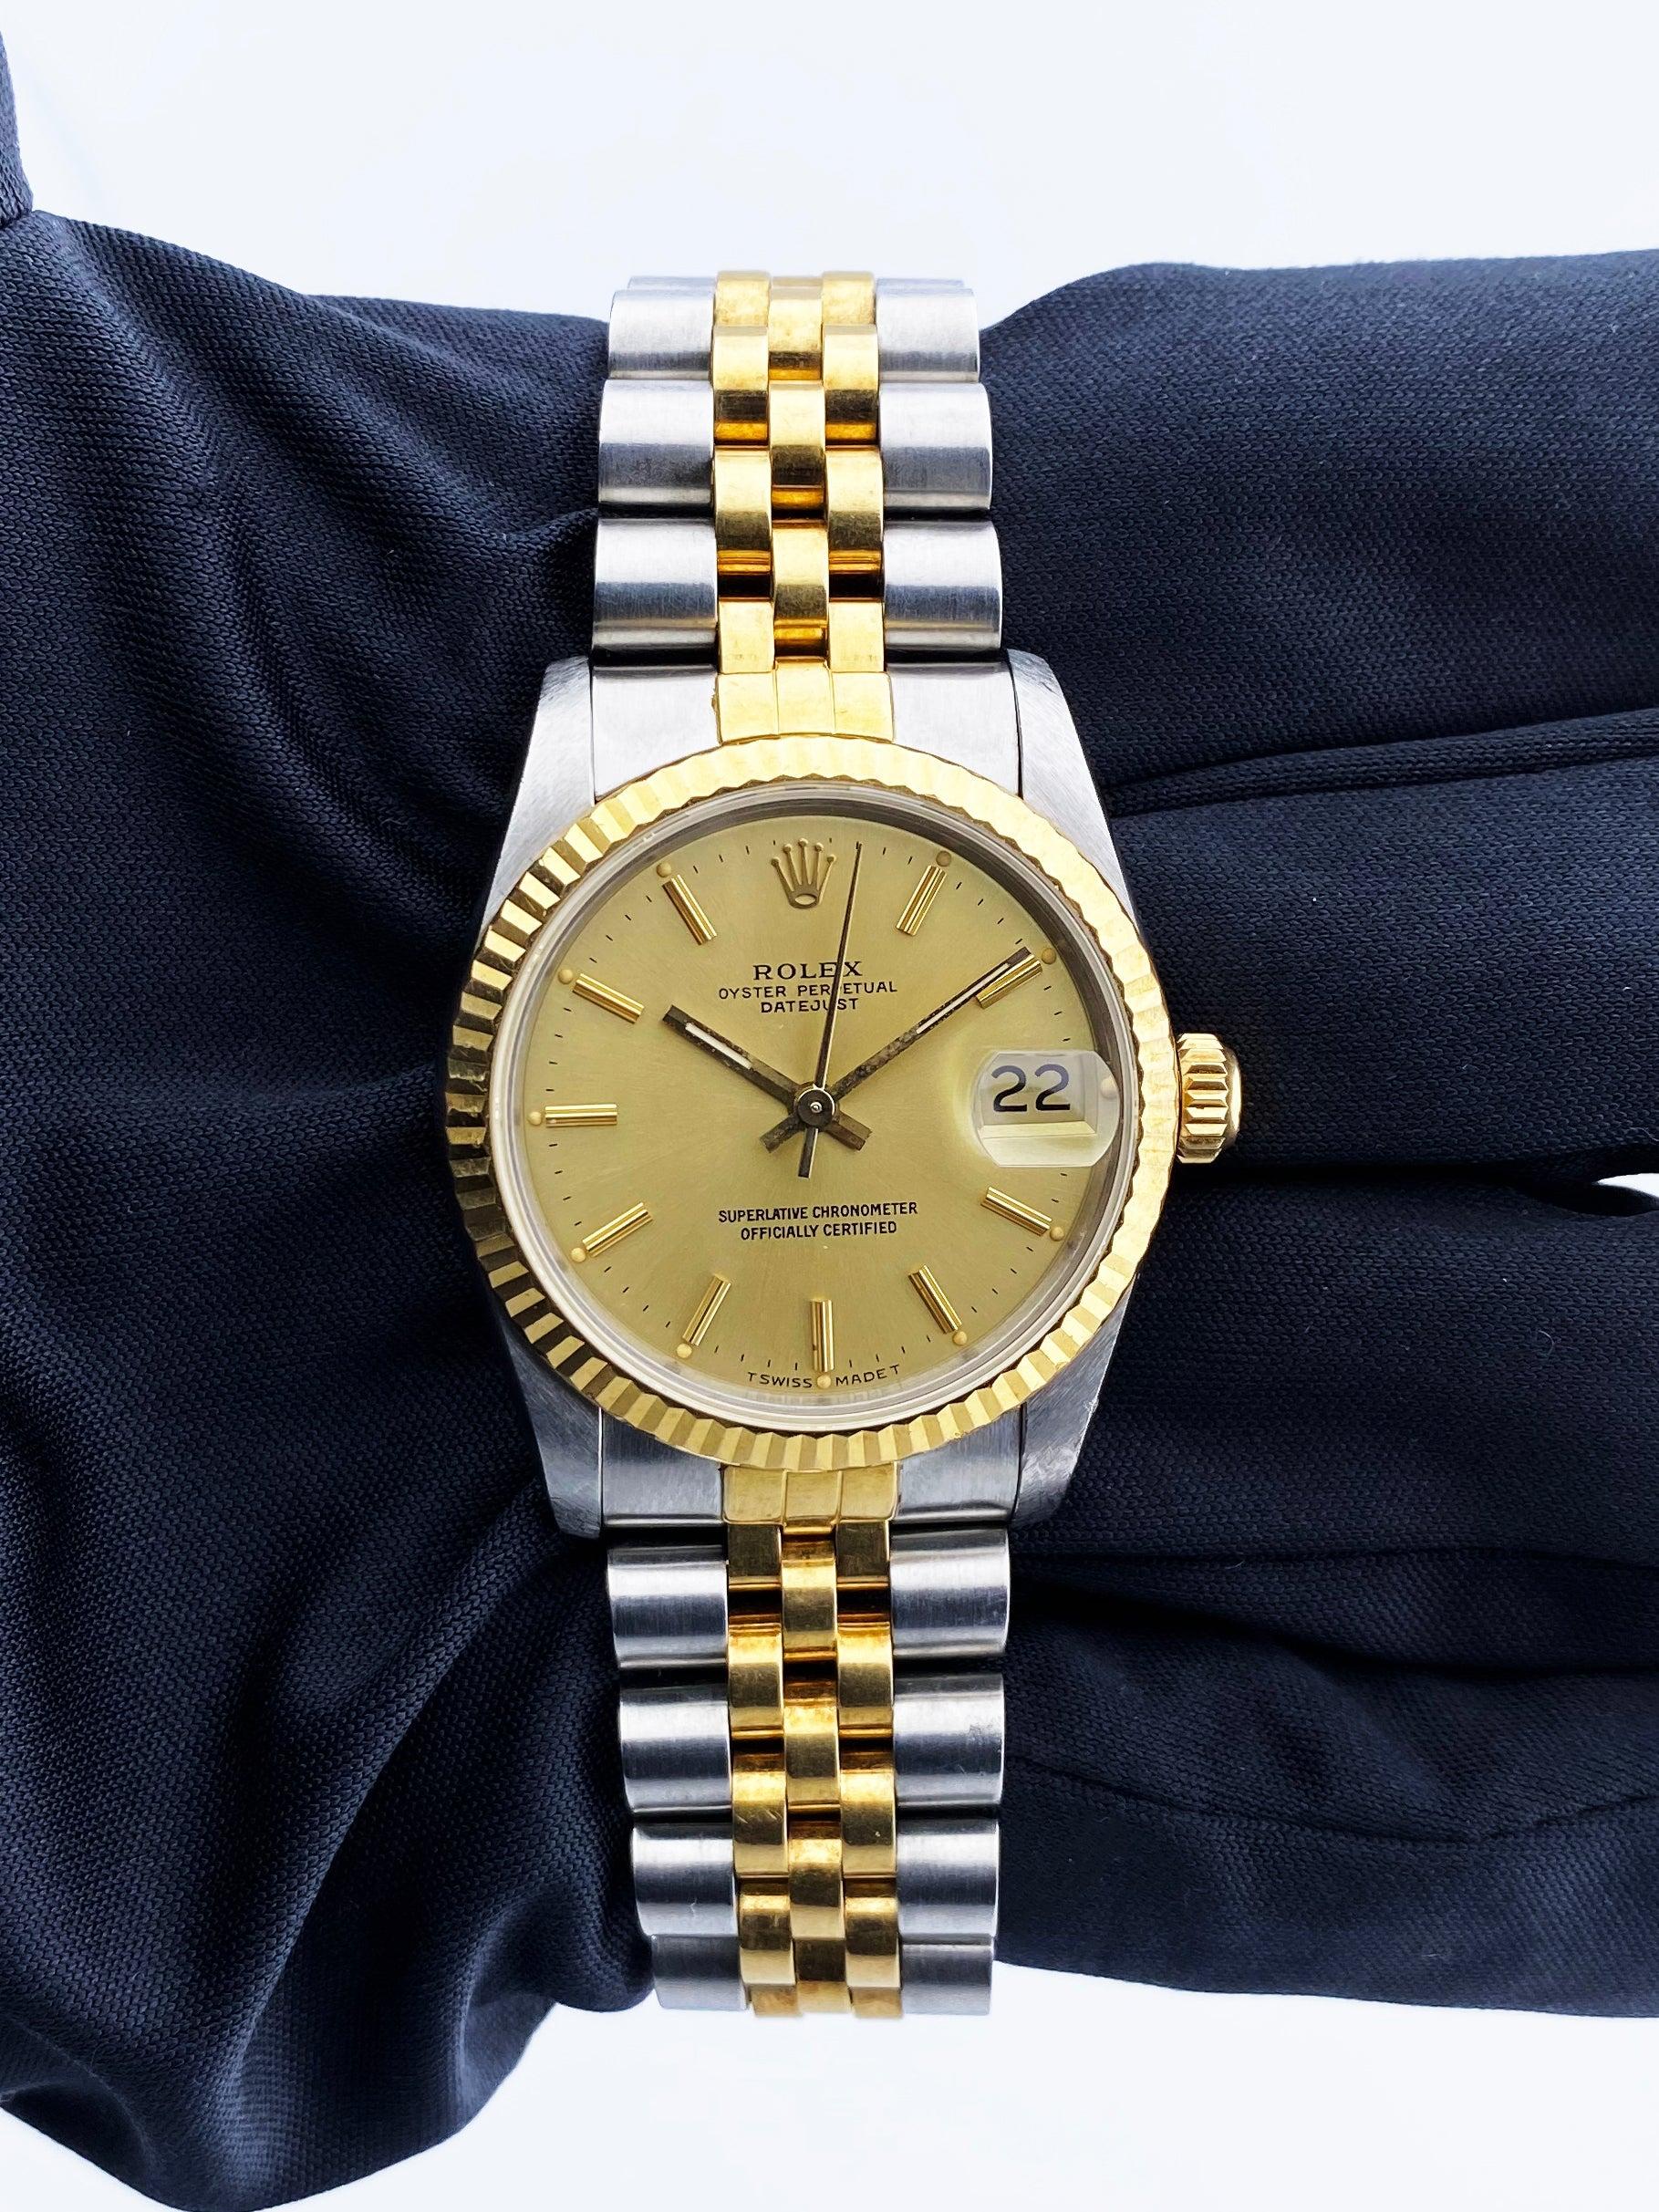 Rolex Datejust 68273 Ladies Watch. 31mm stainless steel case. 18K yellow gold fluted bezel. Champagne dial with gold hands and index hour markers. Minute markers on the outer dial. Date display at the 3 o'clock position. Stainless steel & 18K yellow